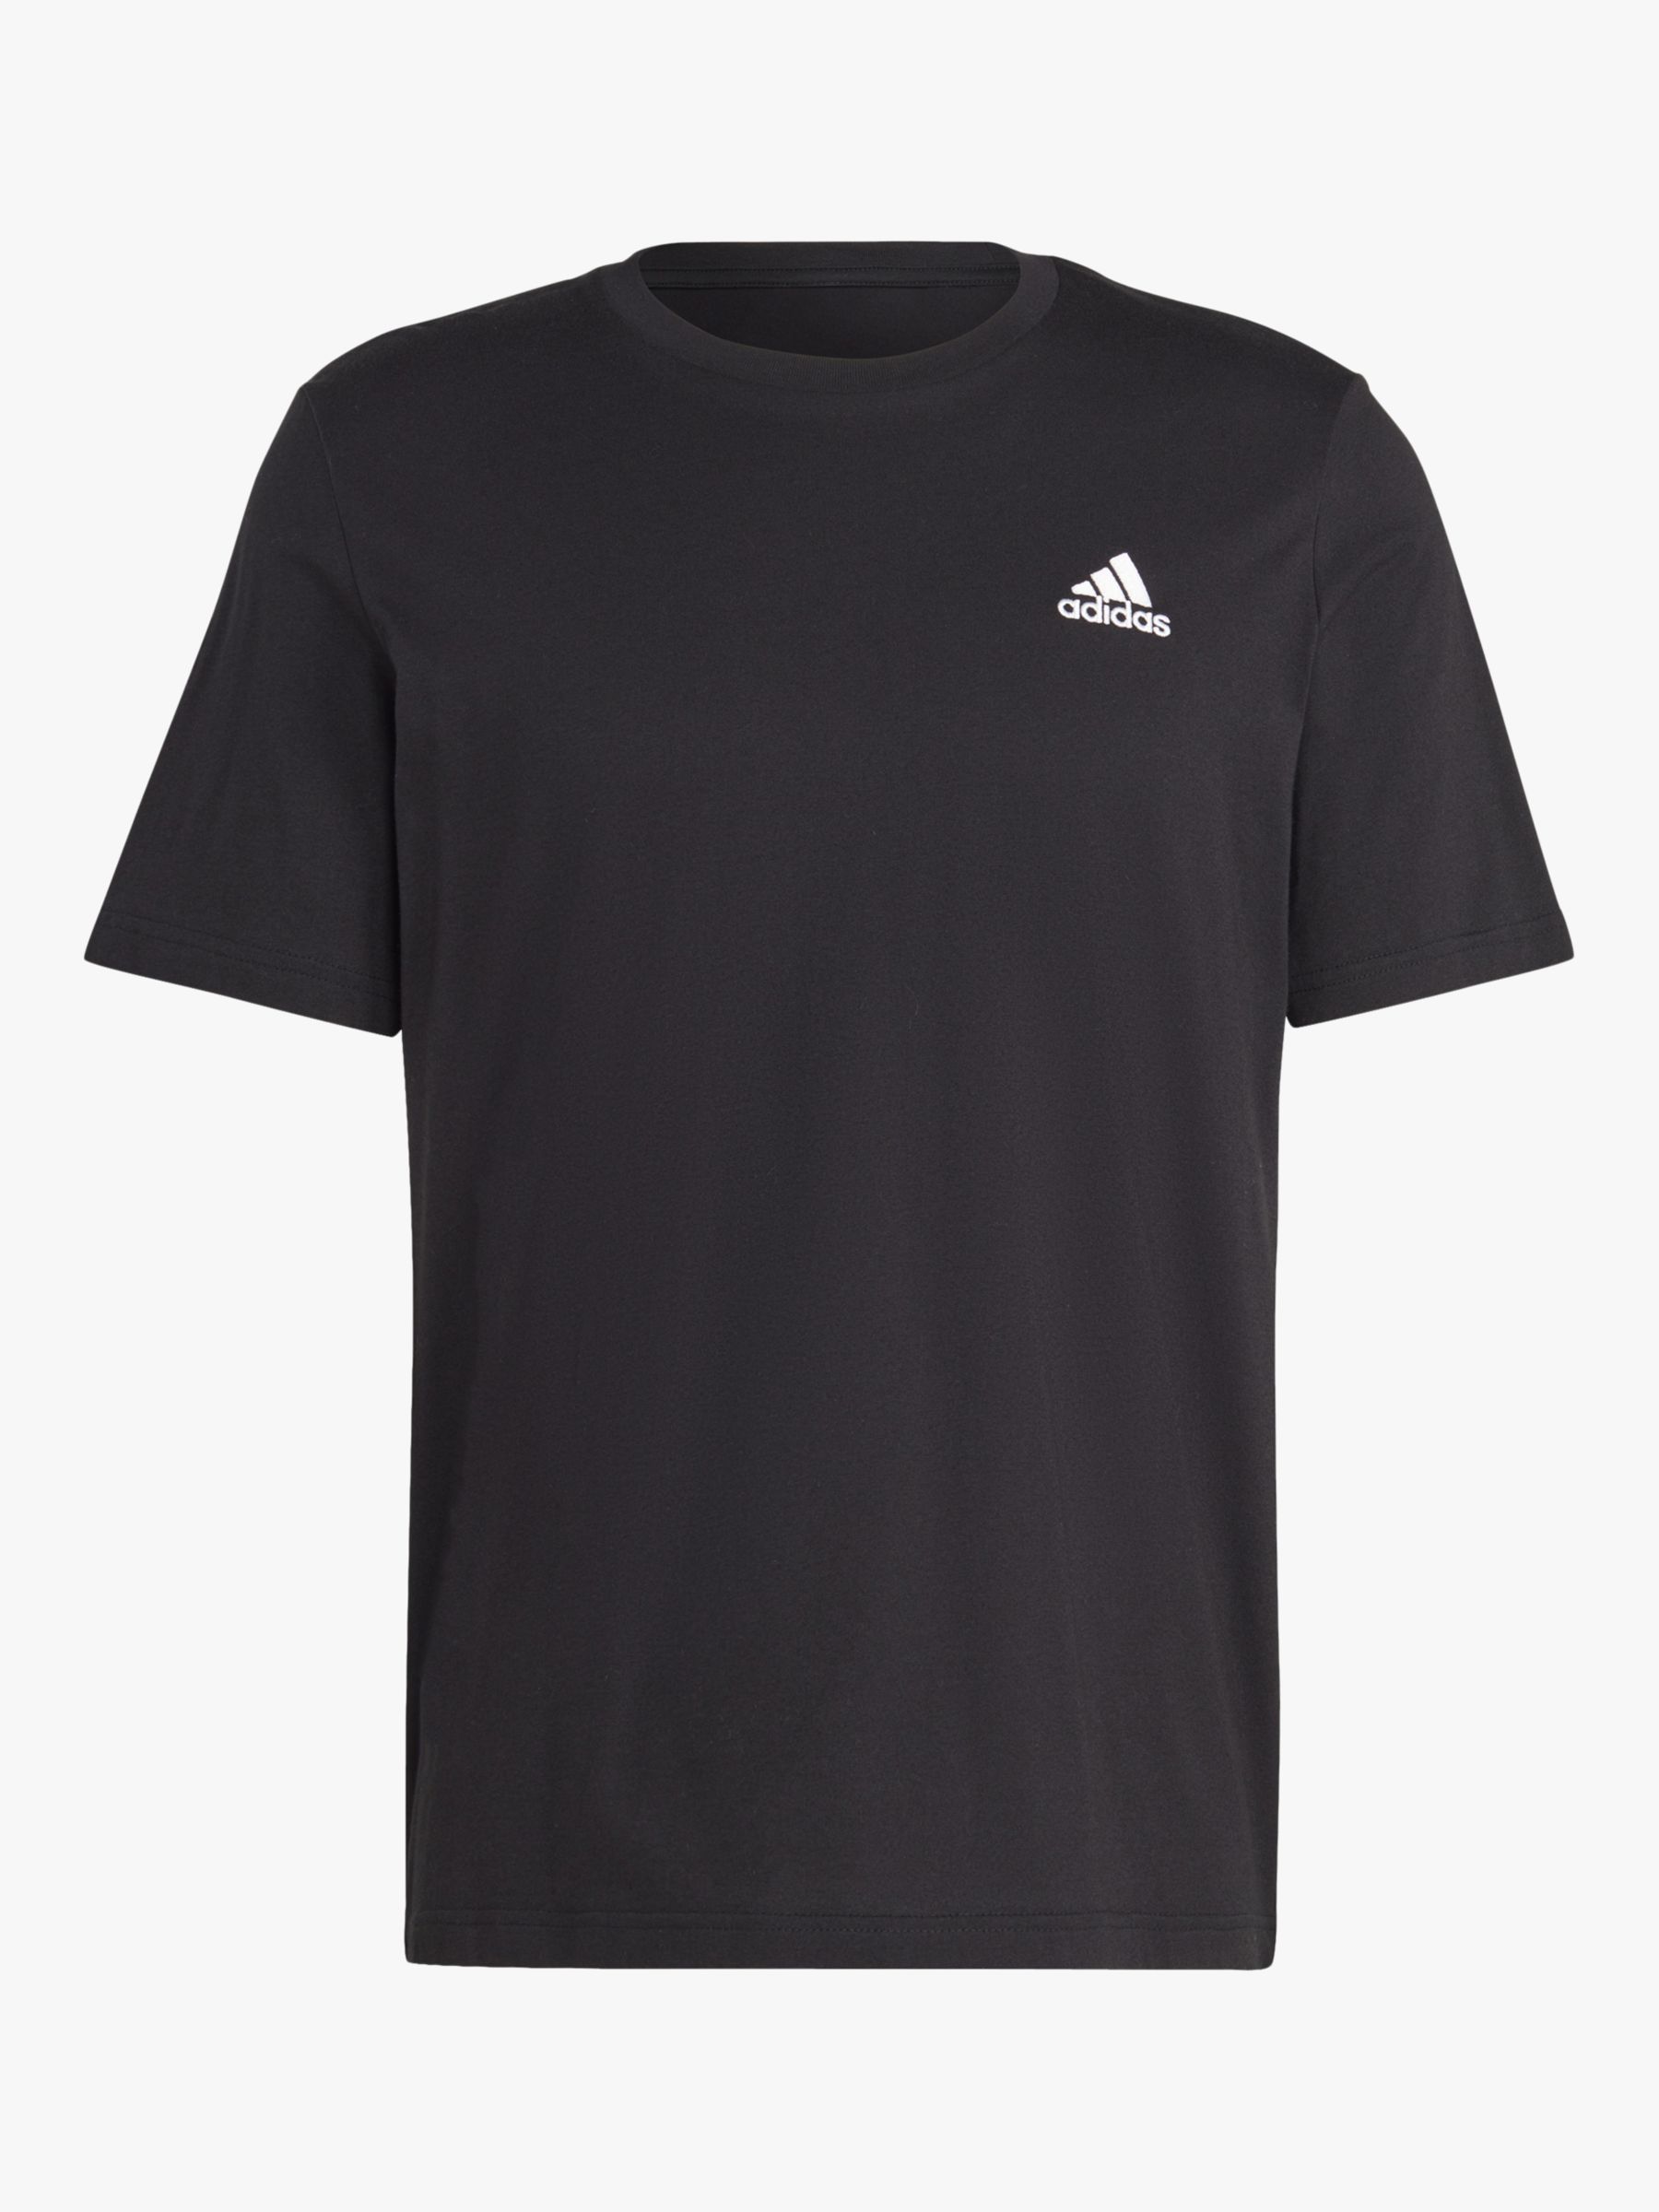 adidas Essentials Embroidered Small Logo Top, Black, S